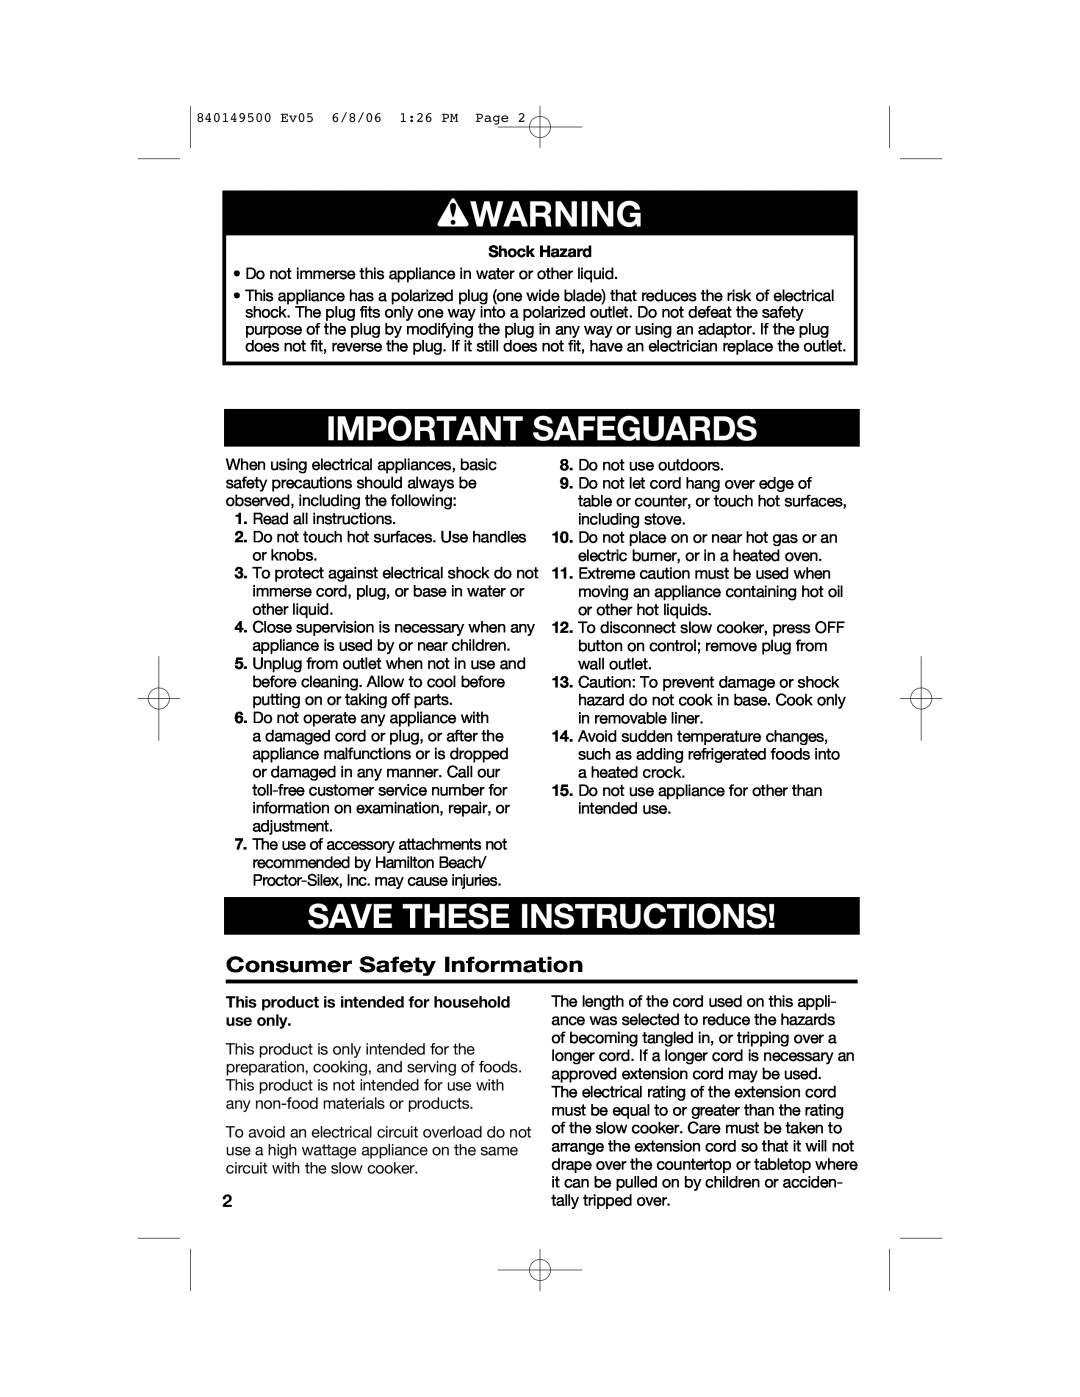 Proctor-Silex 840149500 wWARNING, Important Safeguards, Save These Instructions, Consumer Safety Information, Shock Hazard 